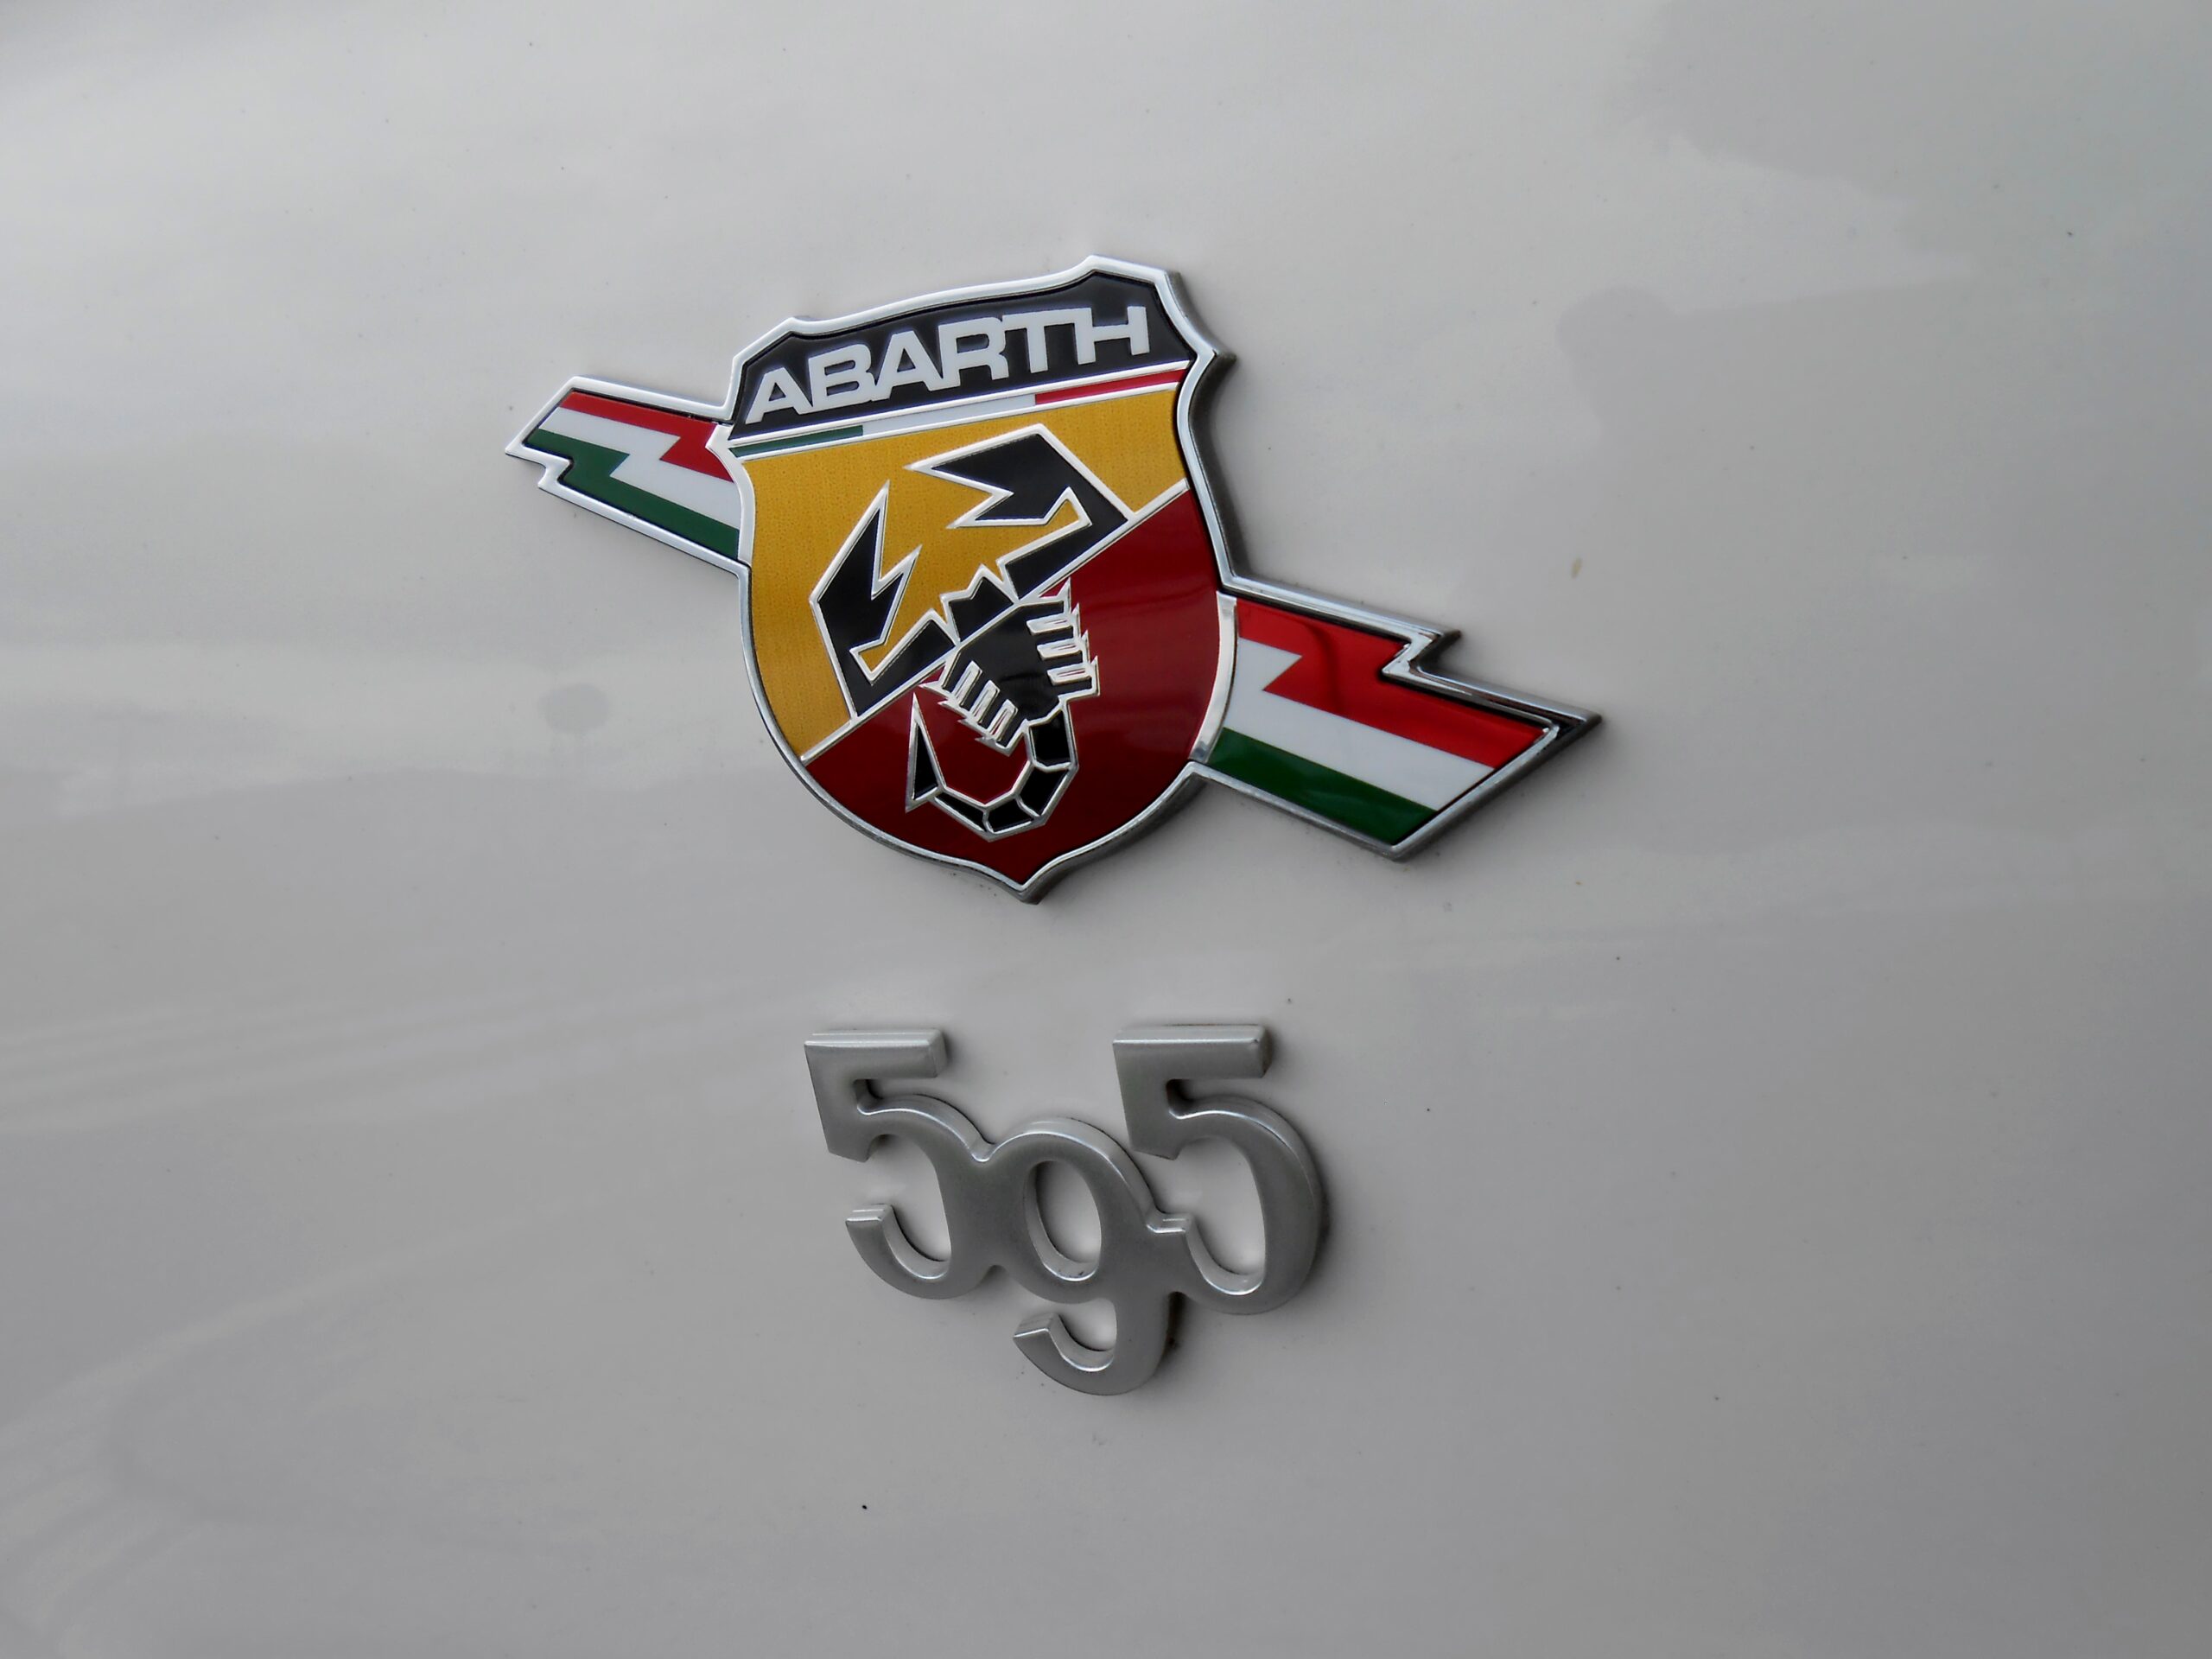 <p>Even though it’s not a common car to see, their logo is instantly recognizable when you pass by a car of theirs. Abarth is another Italian car company that prides itself on quality and power. The scorpion that centers their logo makes it known their cars aren’t to be messed with. The green, white, and red of the Italian flag grace the top of the logo so you know where the car is from. These cars might not be the most popular, but their classic design and logo make it hard to forget when you see one.</p> <p>Agree with this? Hit the Thumbs Up button above. Disagree? Let us know in the comments with what you'd change.</p>